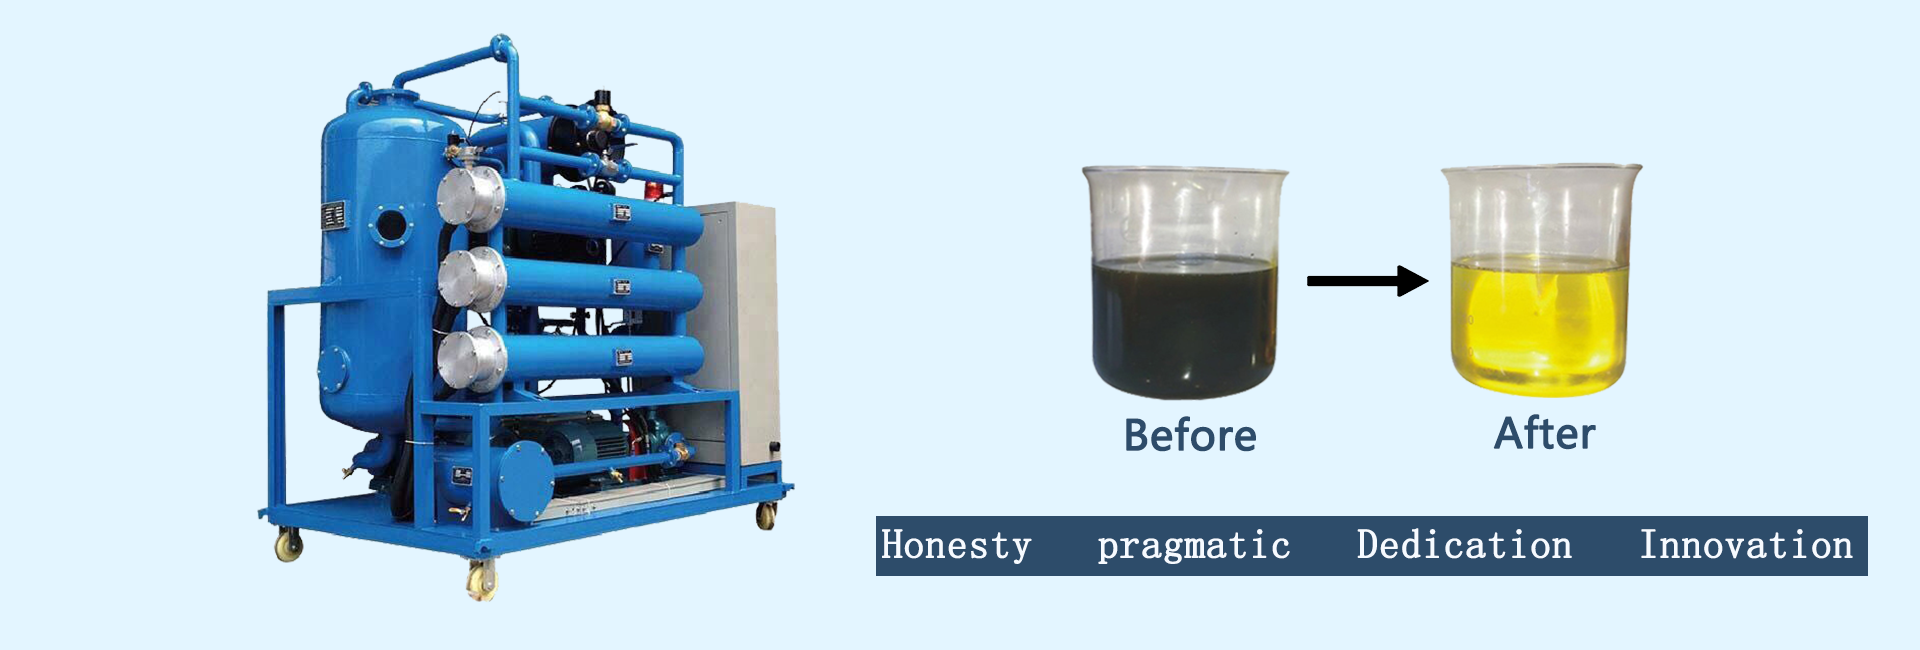 Lubricant Oil Purifier